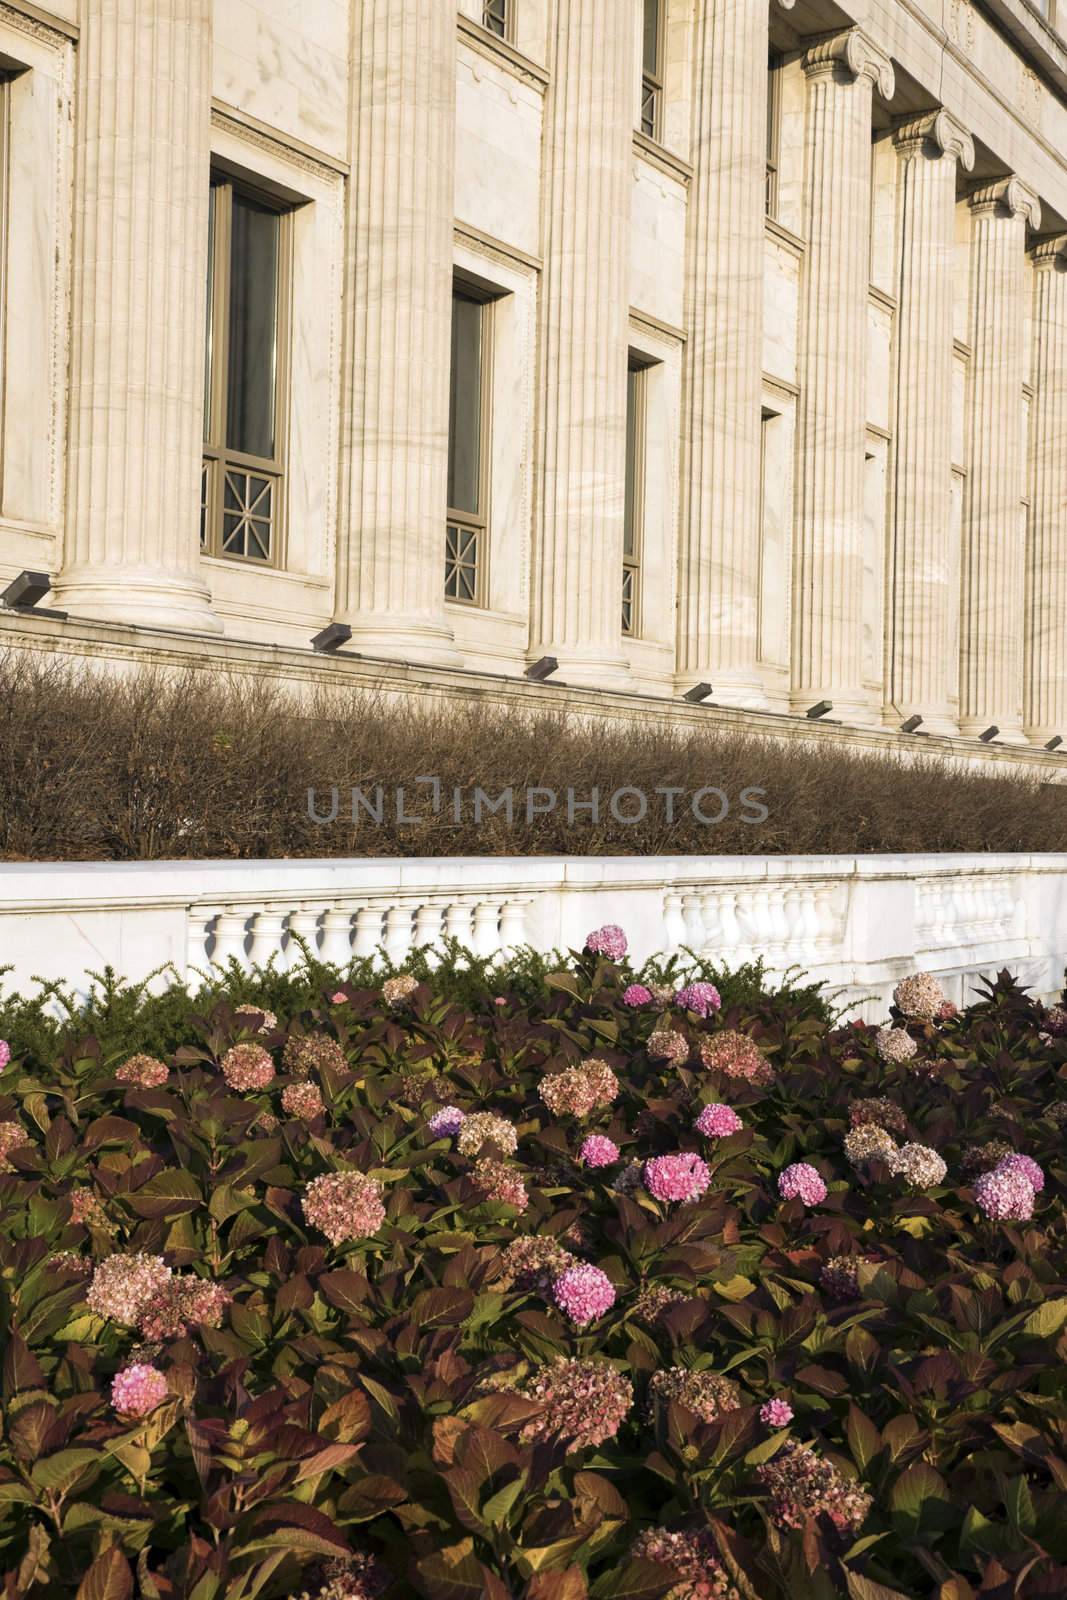 Flowers and Columns by benkrut